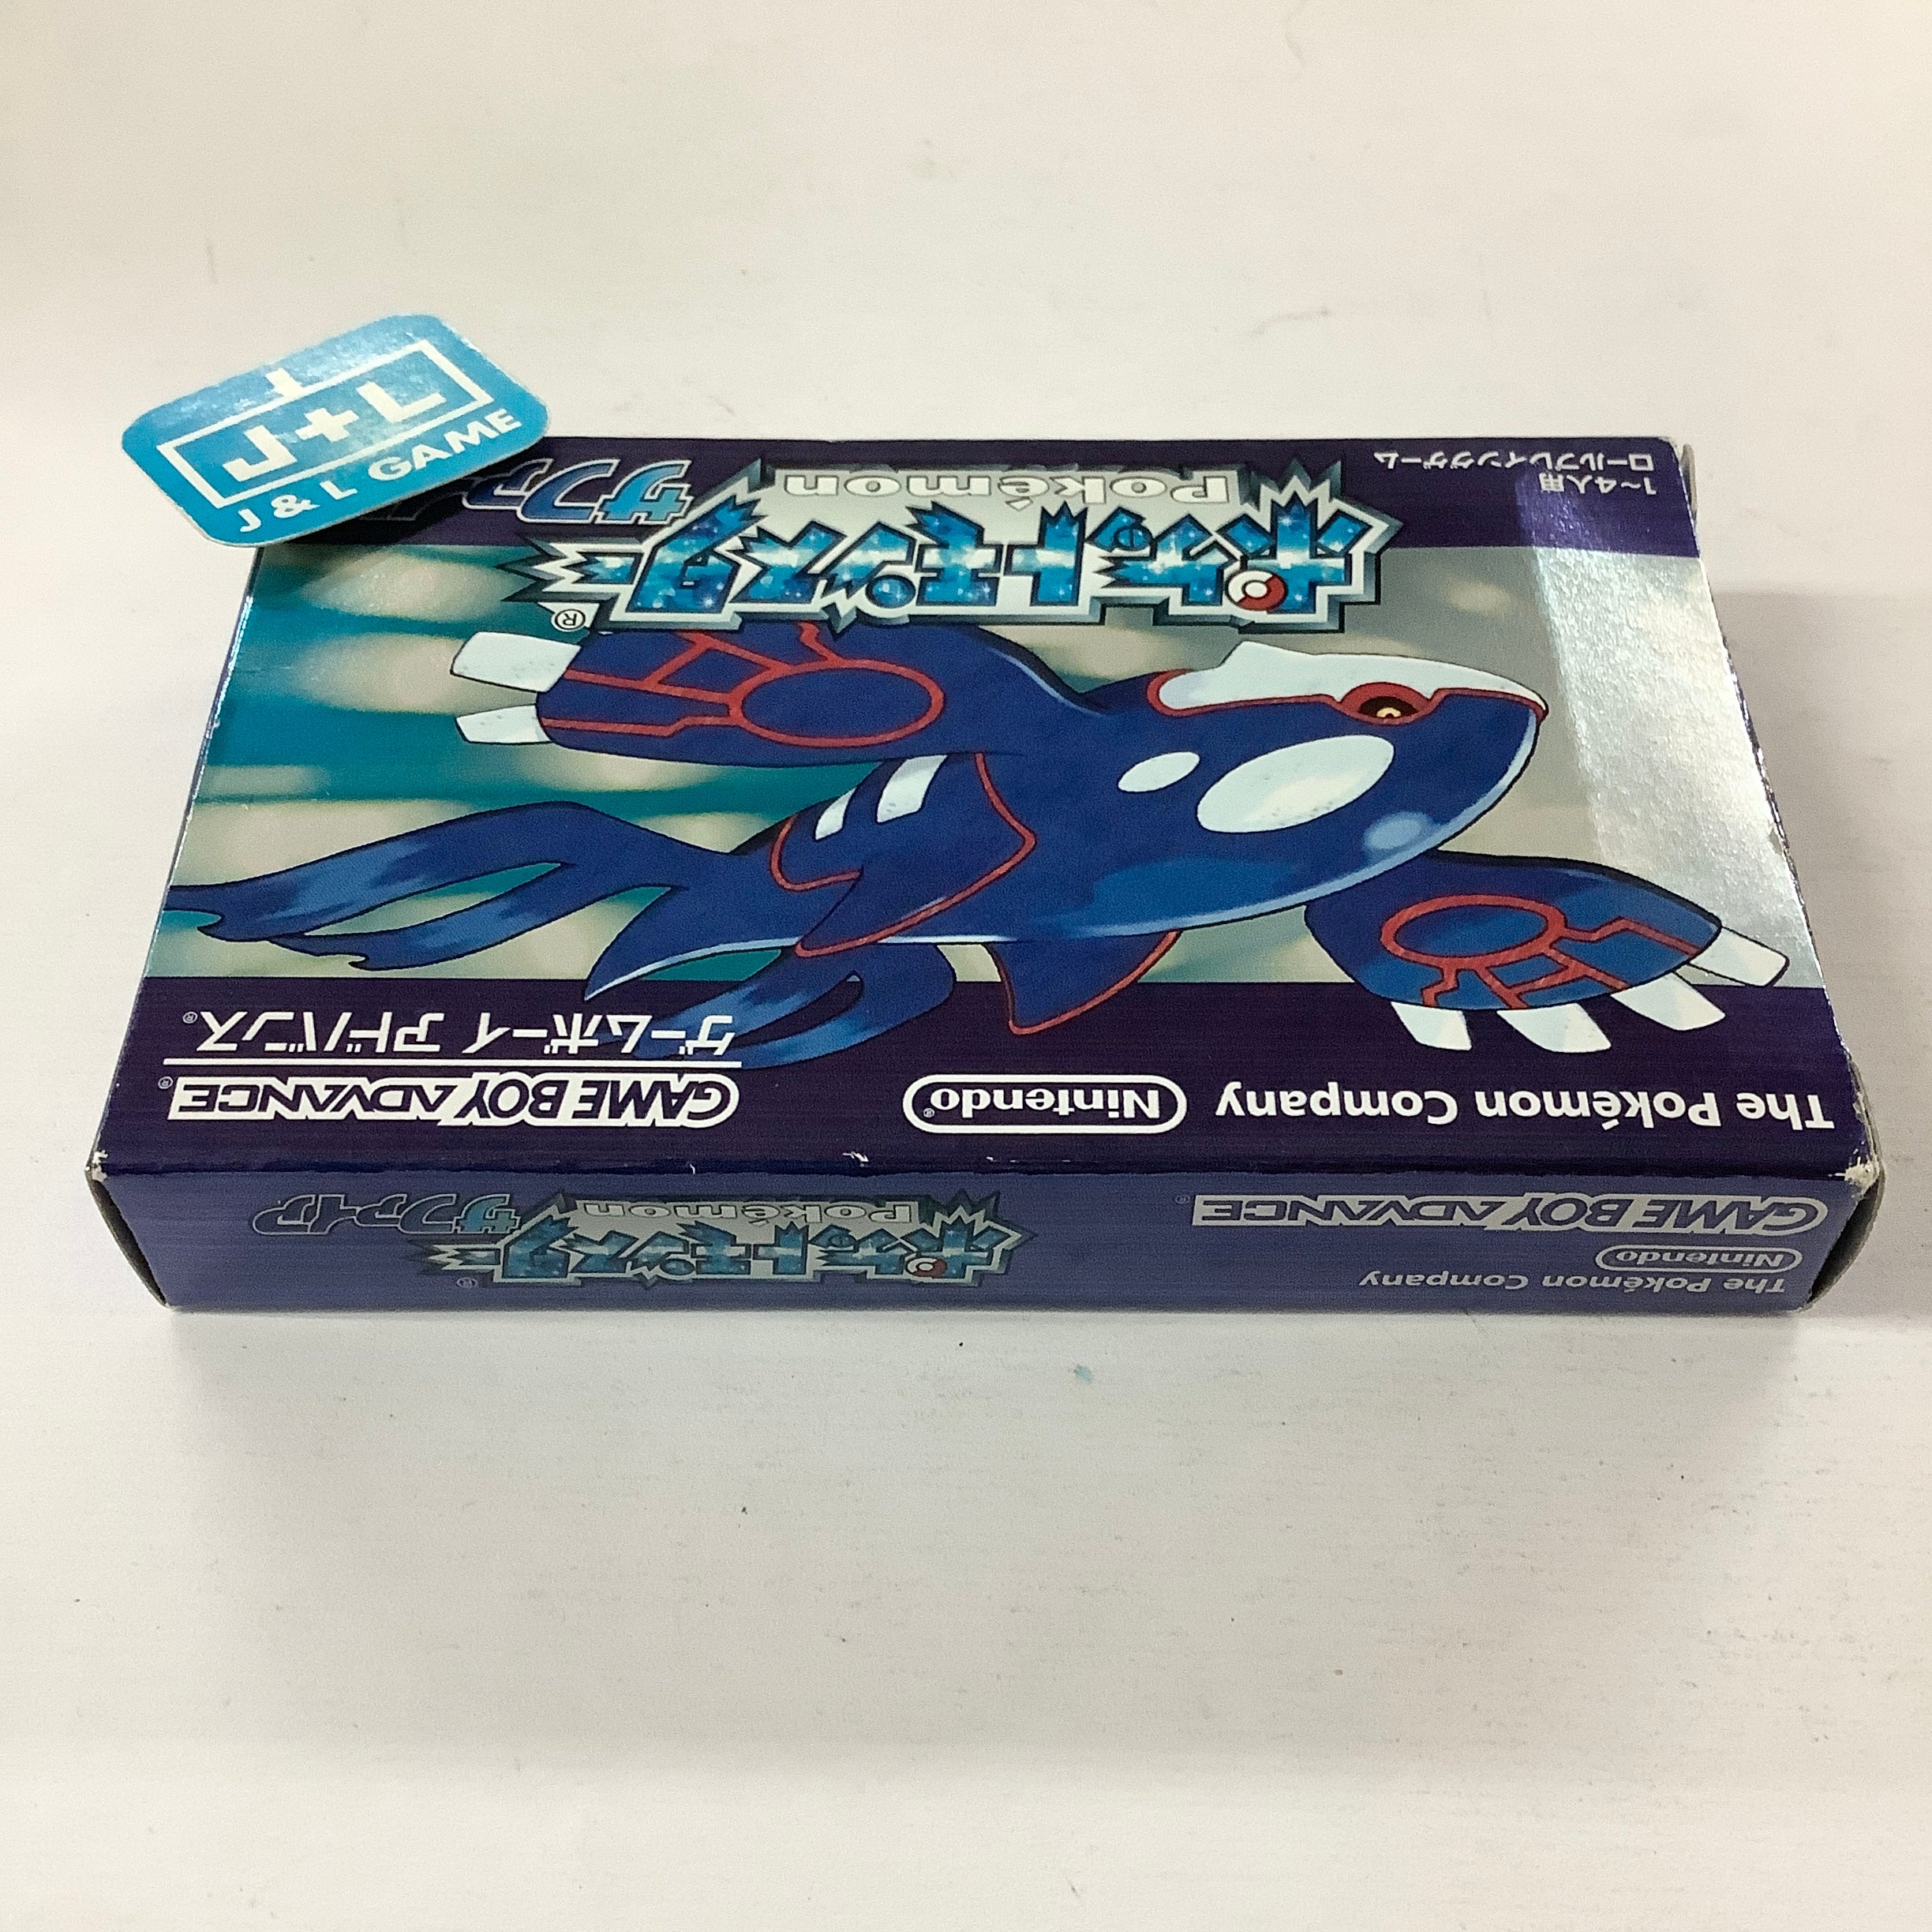 Pocket Monsters Sapphire Version - (GBA) Game Boy Advance [Pre-Owned] (Japanese Import) Video Games The Pokemon Company   